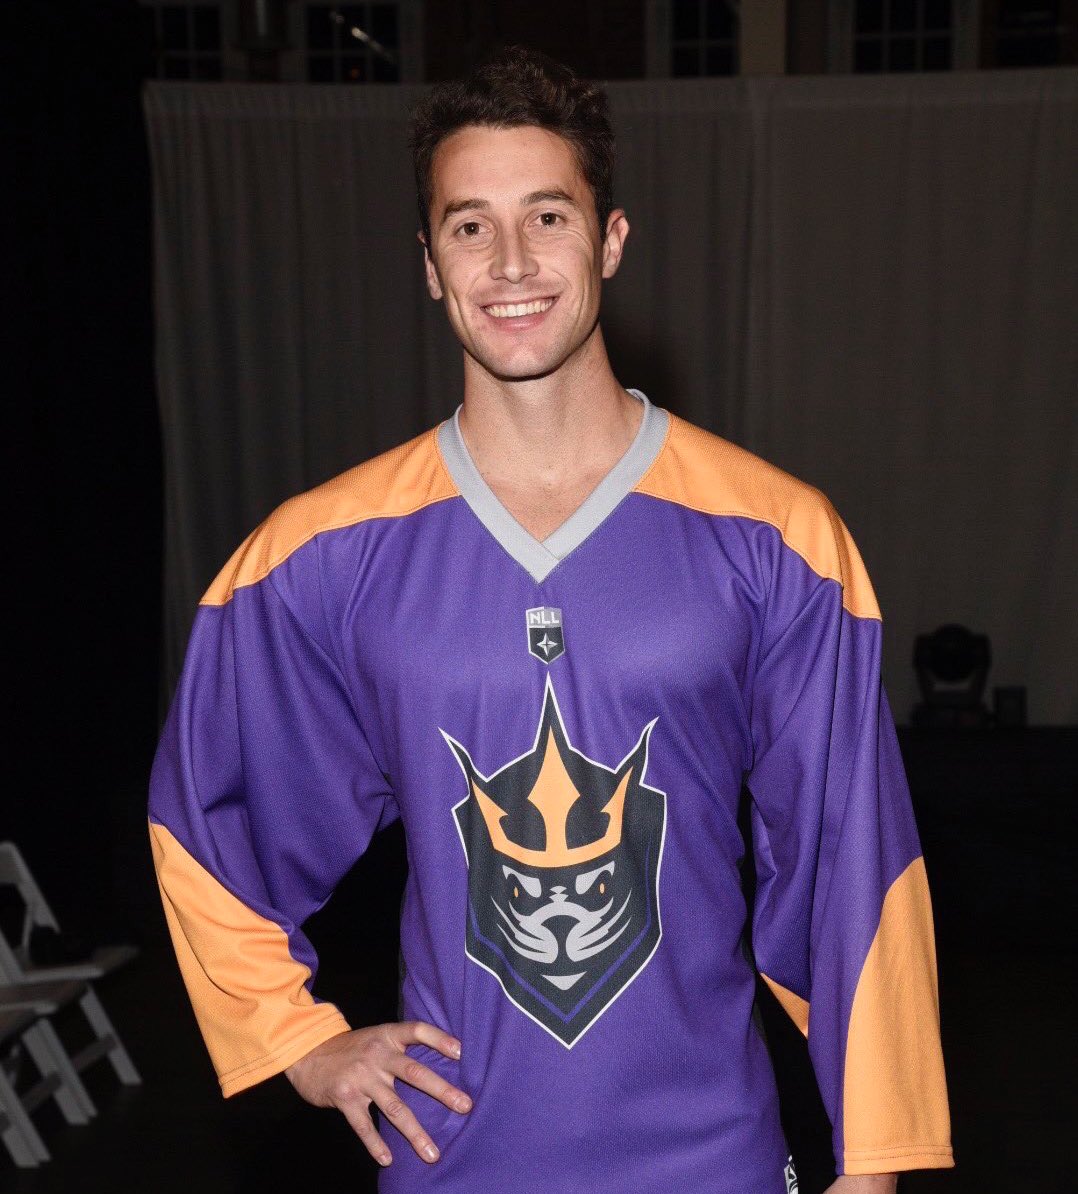 Rich Ohrnberger on X: Fun night with the San Diego Seals, my first fashion  show, and a huge milestone for San Diego's newest sports team and only  professional lacrosse team. The jersey